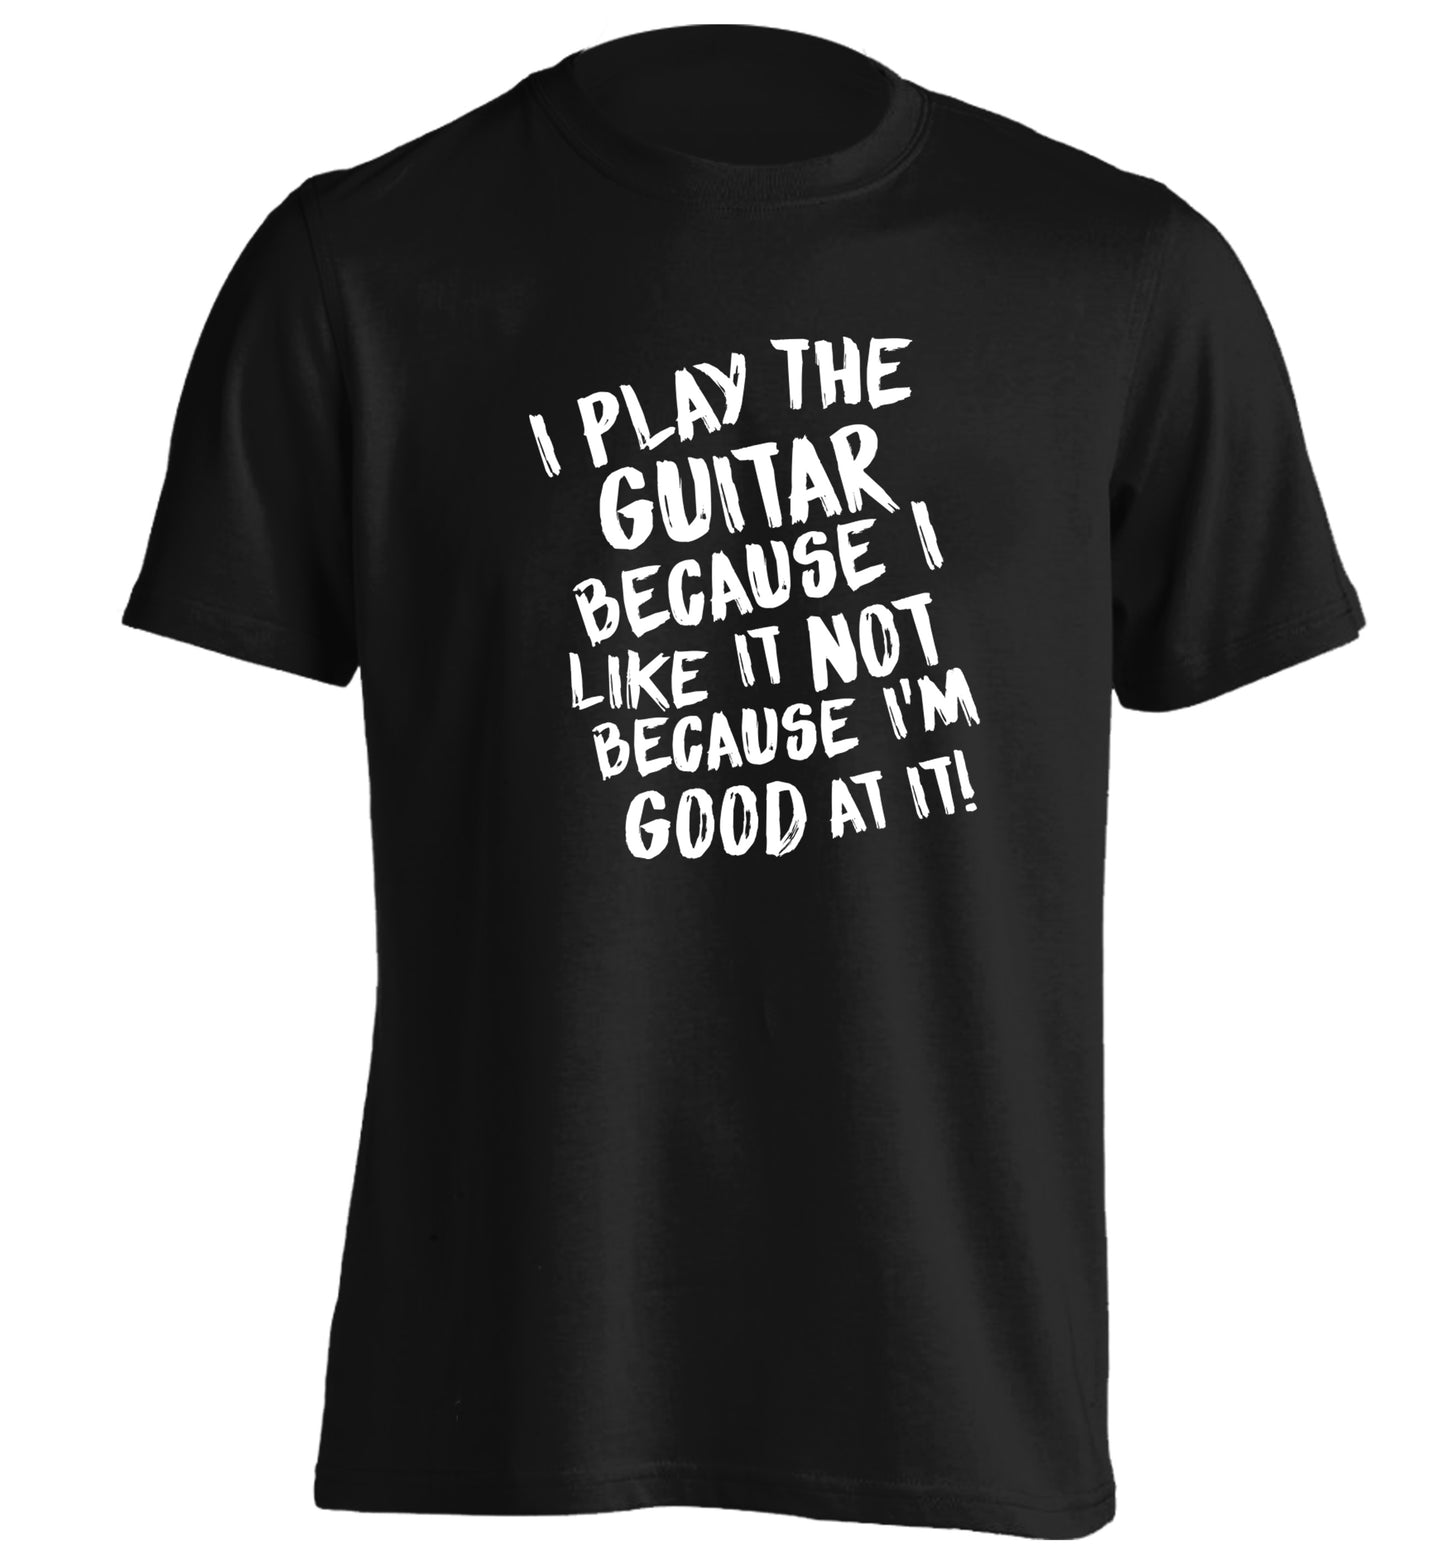 I play the guitar because I like it not because I'm good at it adults unisex black Tshirt 2XL